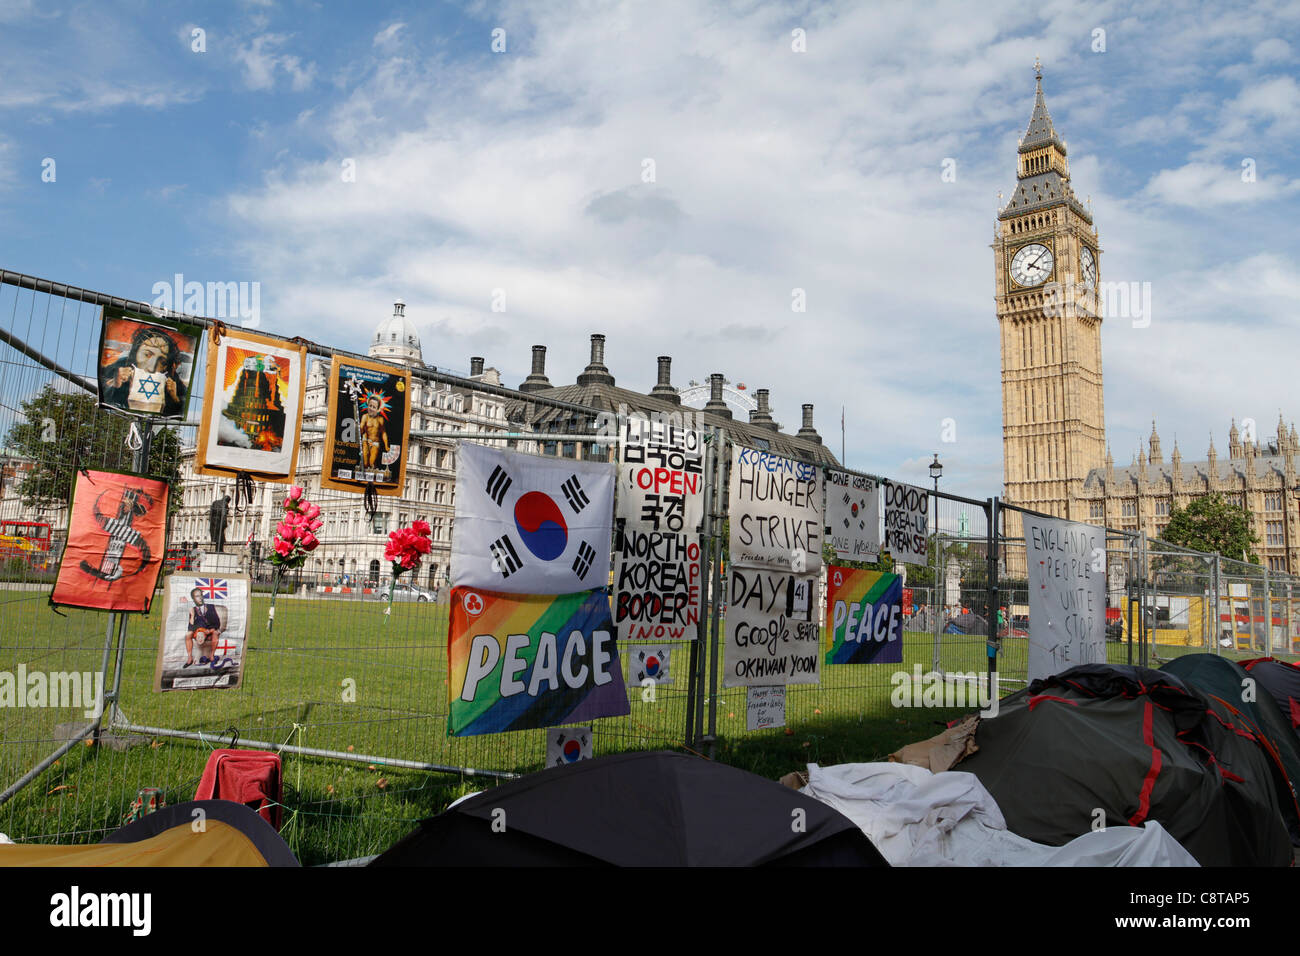 Protest sign at Parliament square in London. Stock Photo